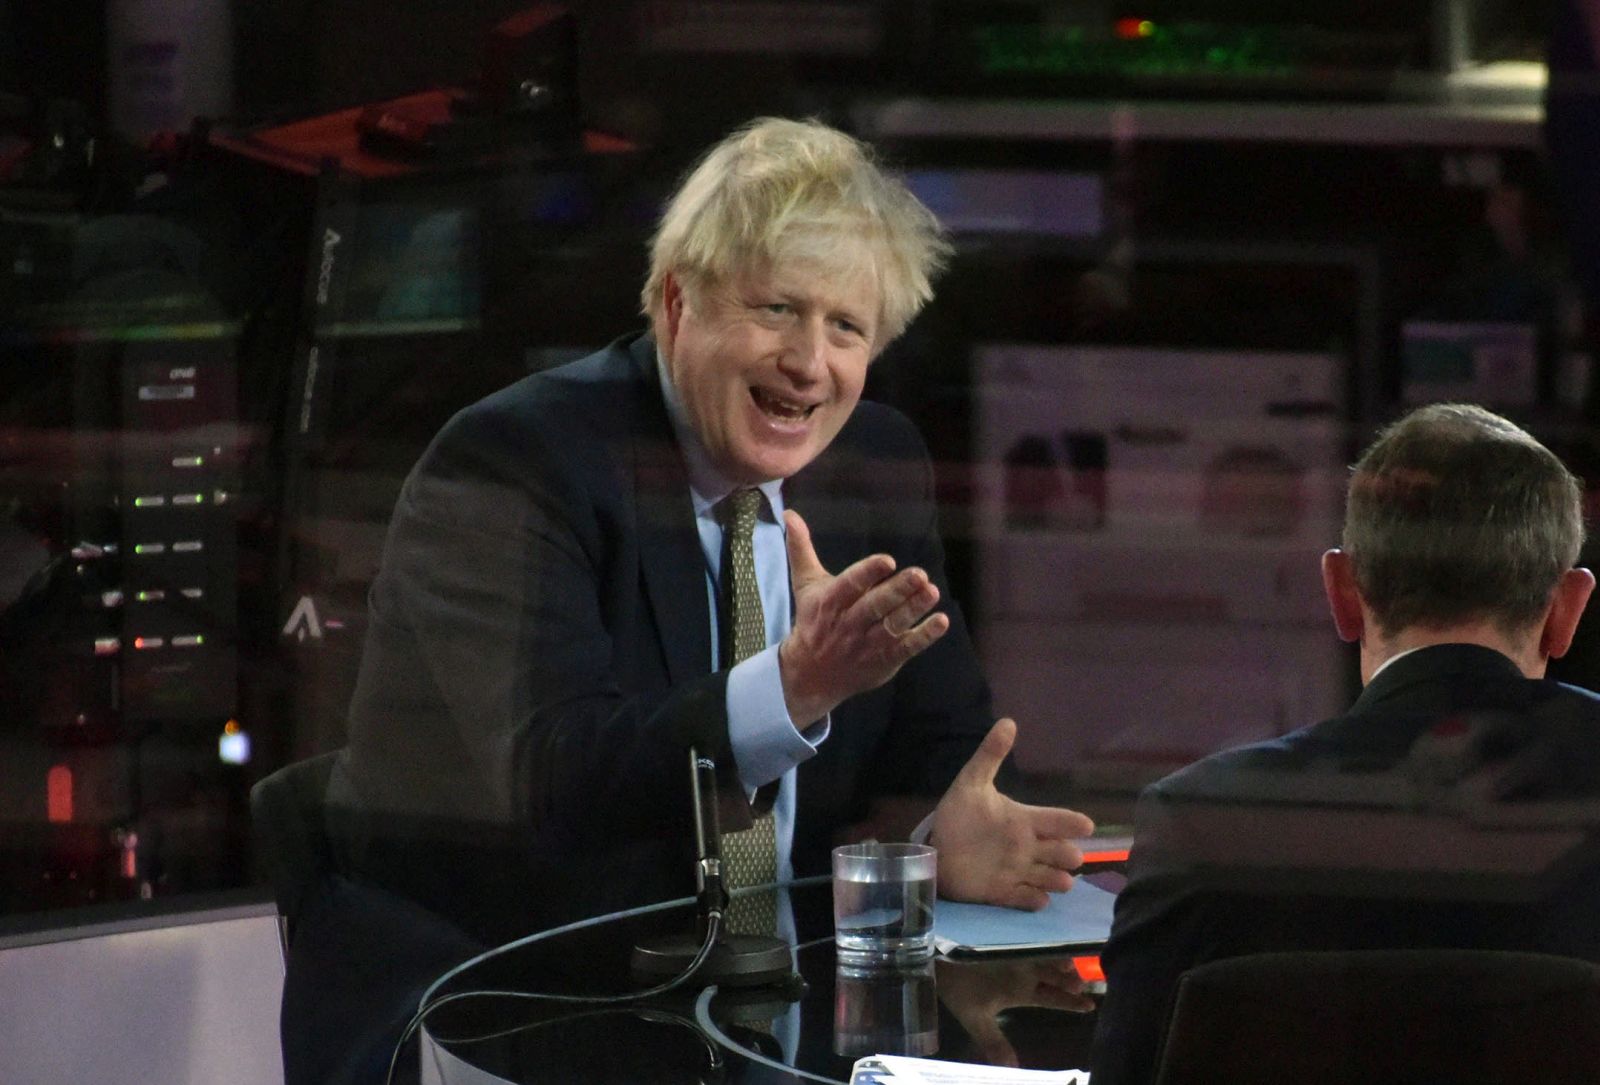 epa08916421 A handout photo made available by the British Broadcasting Corporation (BBC) shows Britain's Prime Minister Boris Johnson appearing at the Andrew Marr show in the BBC studios in London, Britain, 03 January 2021. Johnson said during the interview that Boris Johnson told the BBC that Britain may be facing tougher measures in weeks ahead as the nation battles the ongoing COVID-19 coronavirus pandemic.  EPA/JEFF OVERS HANDOUT ATTENTION EDITORS: PICTURE TAKEN THROUGH GLASS HANDOUT EDITORIAL USE ONLY/NO SALES